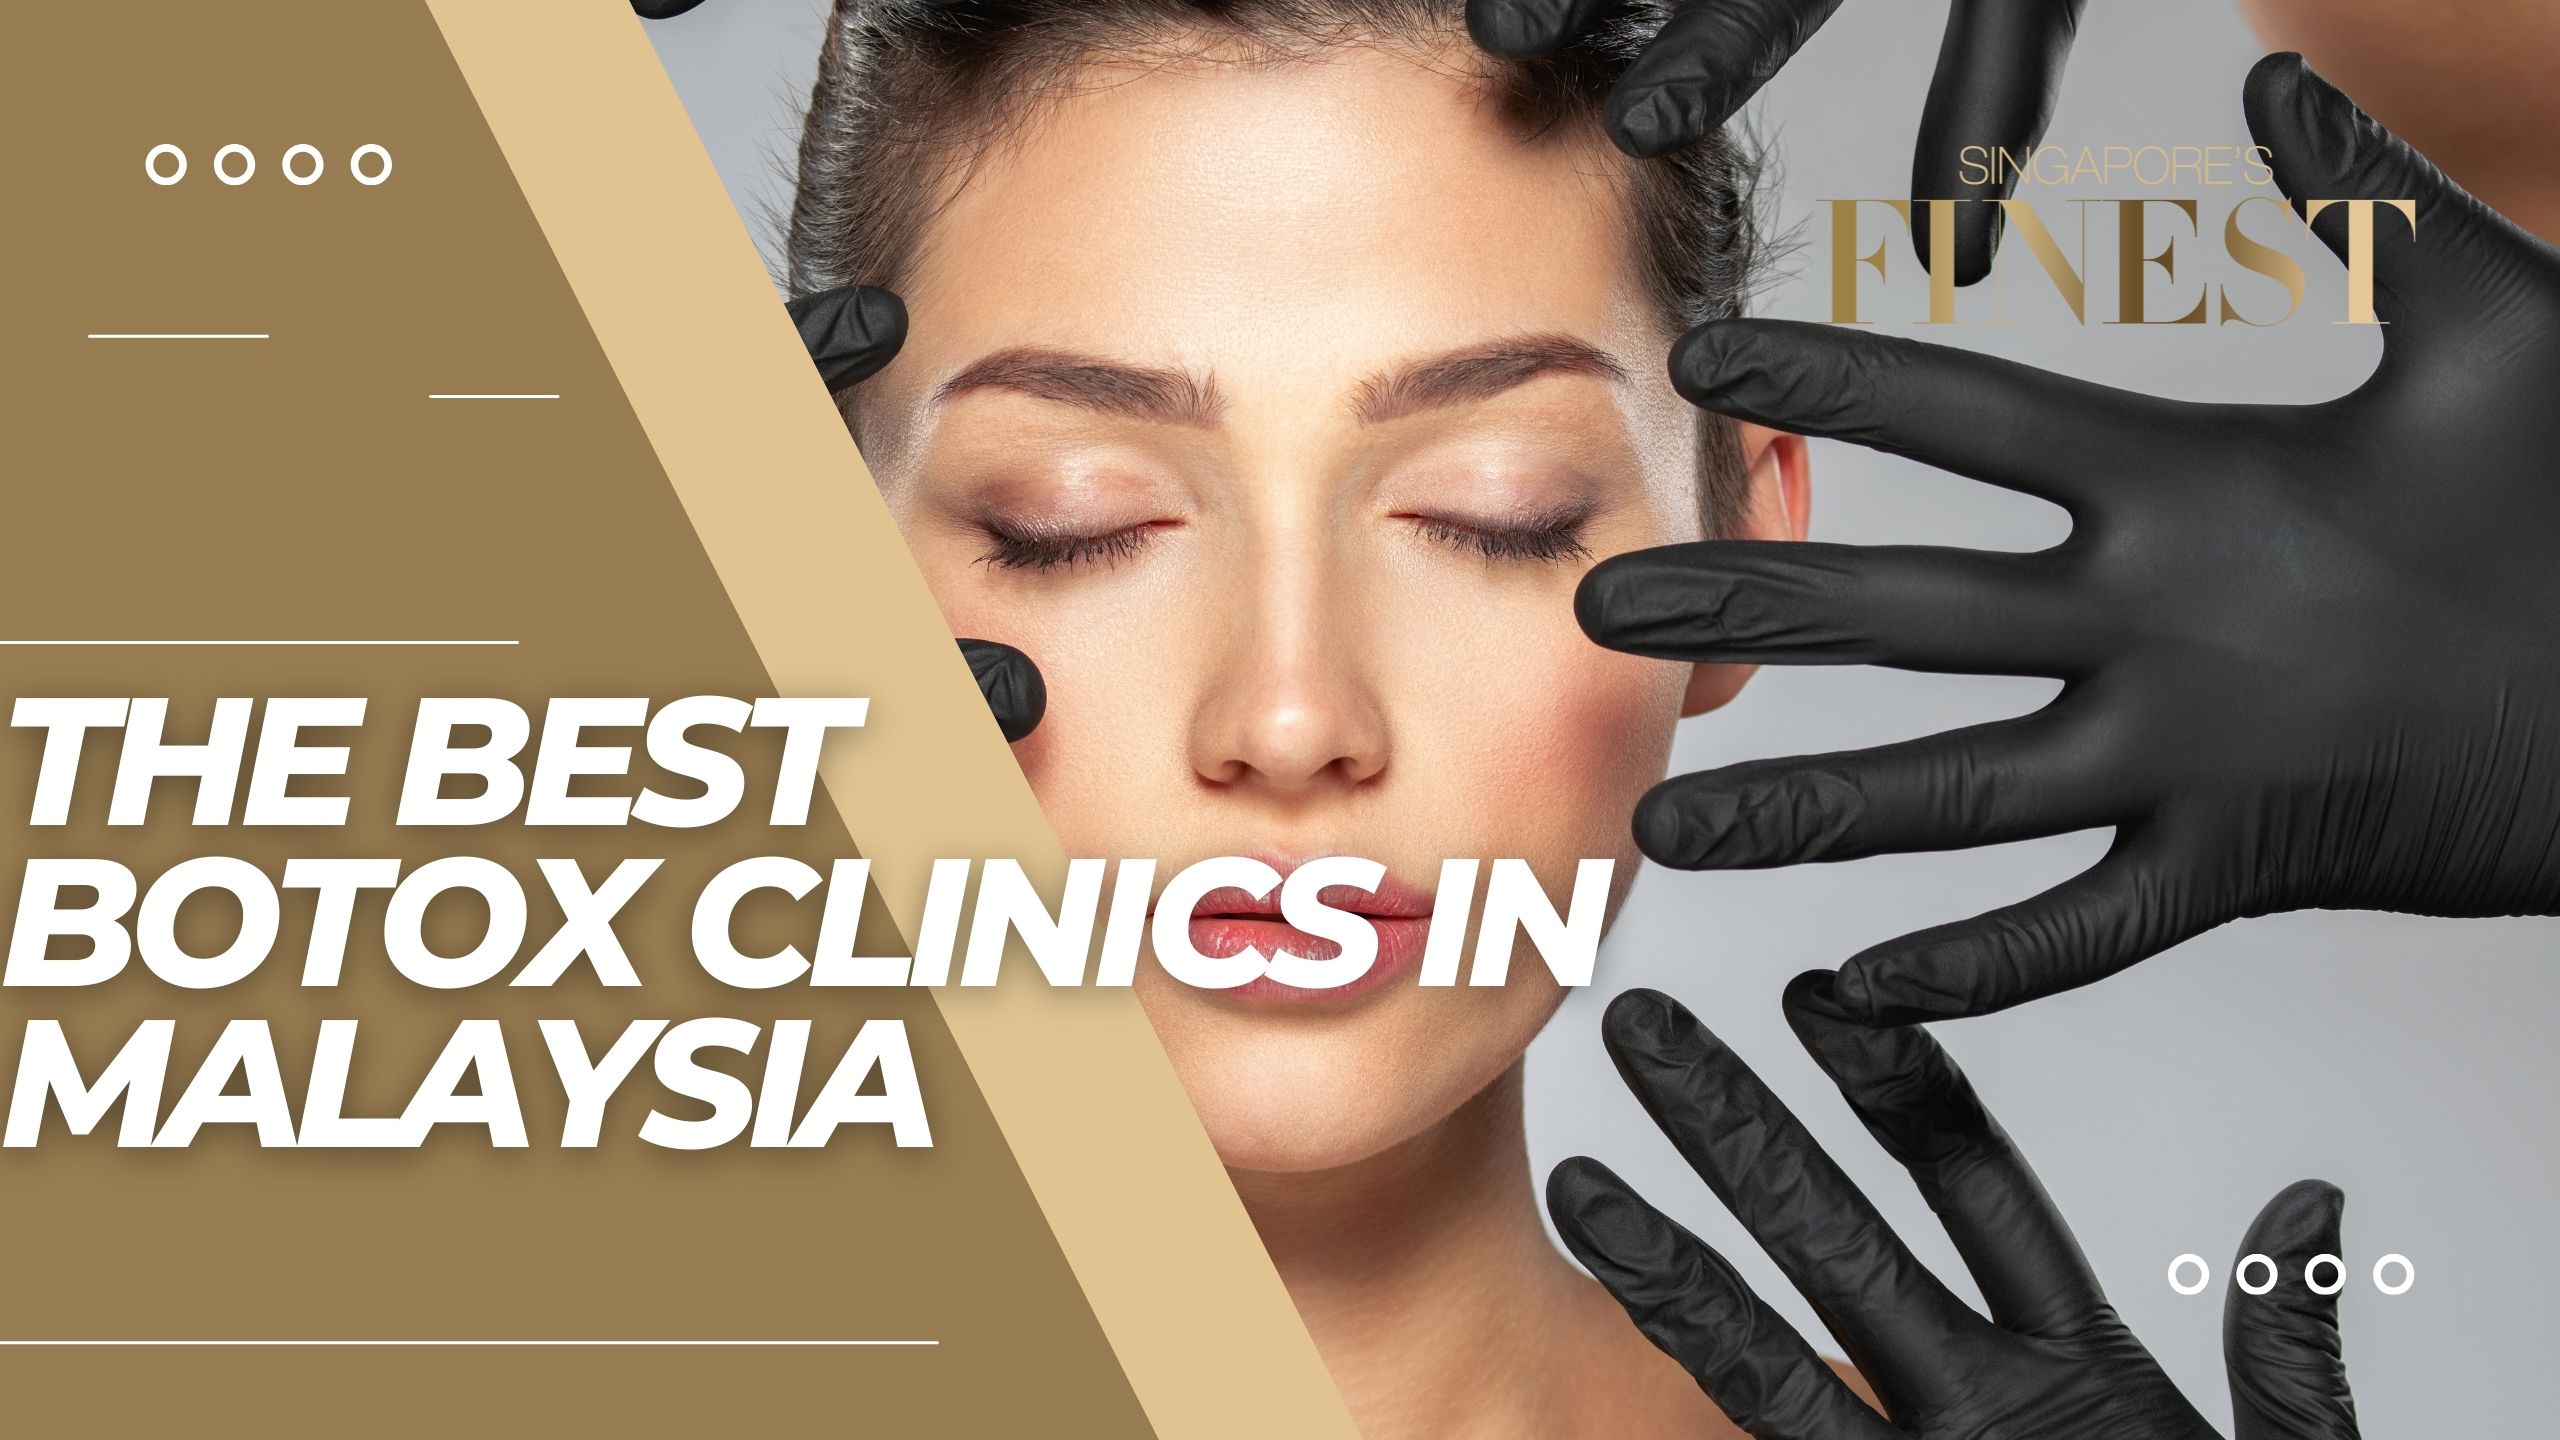 The Finest Botox Clinics in Malaysia